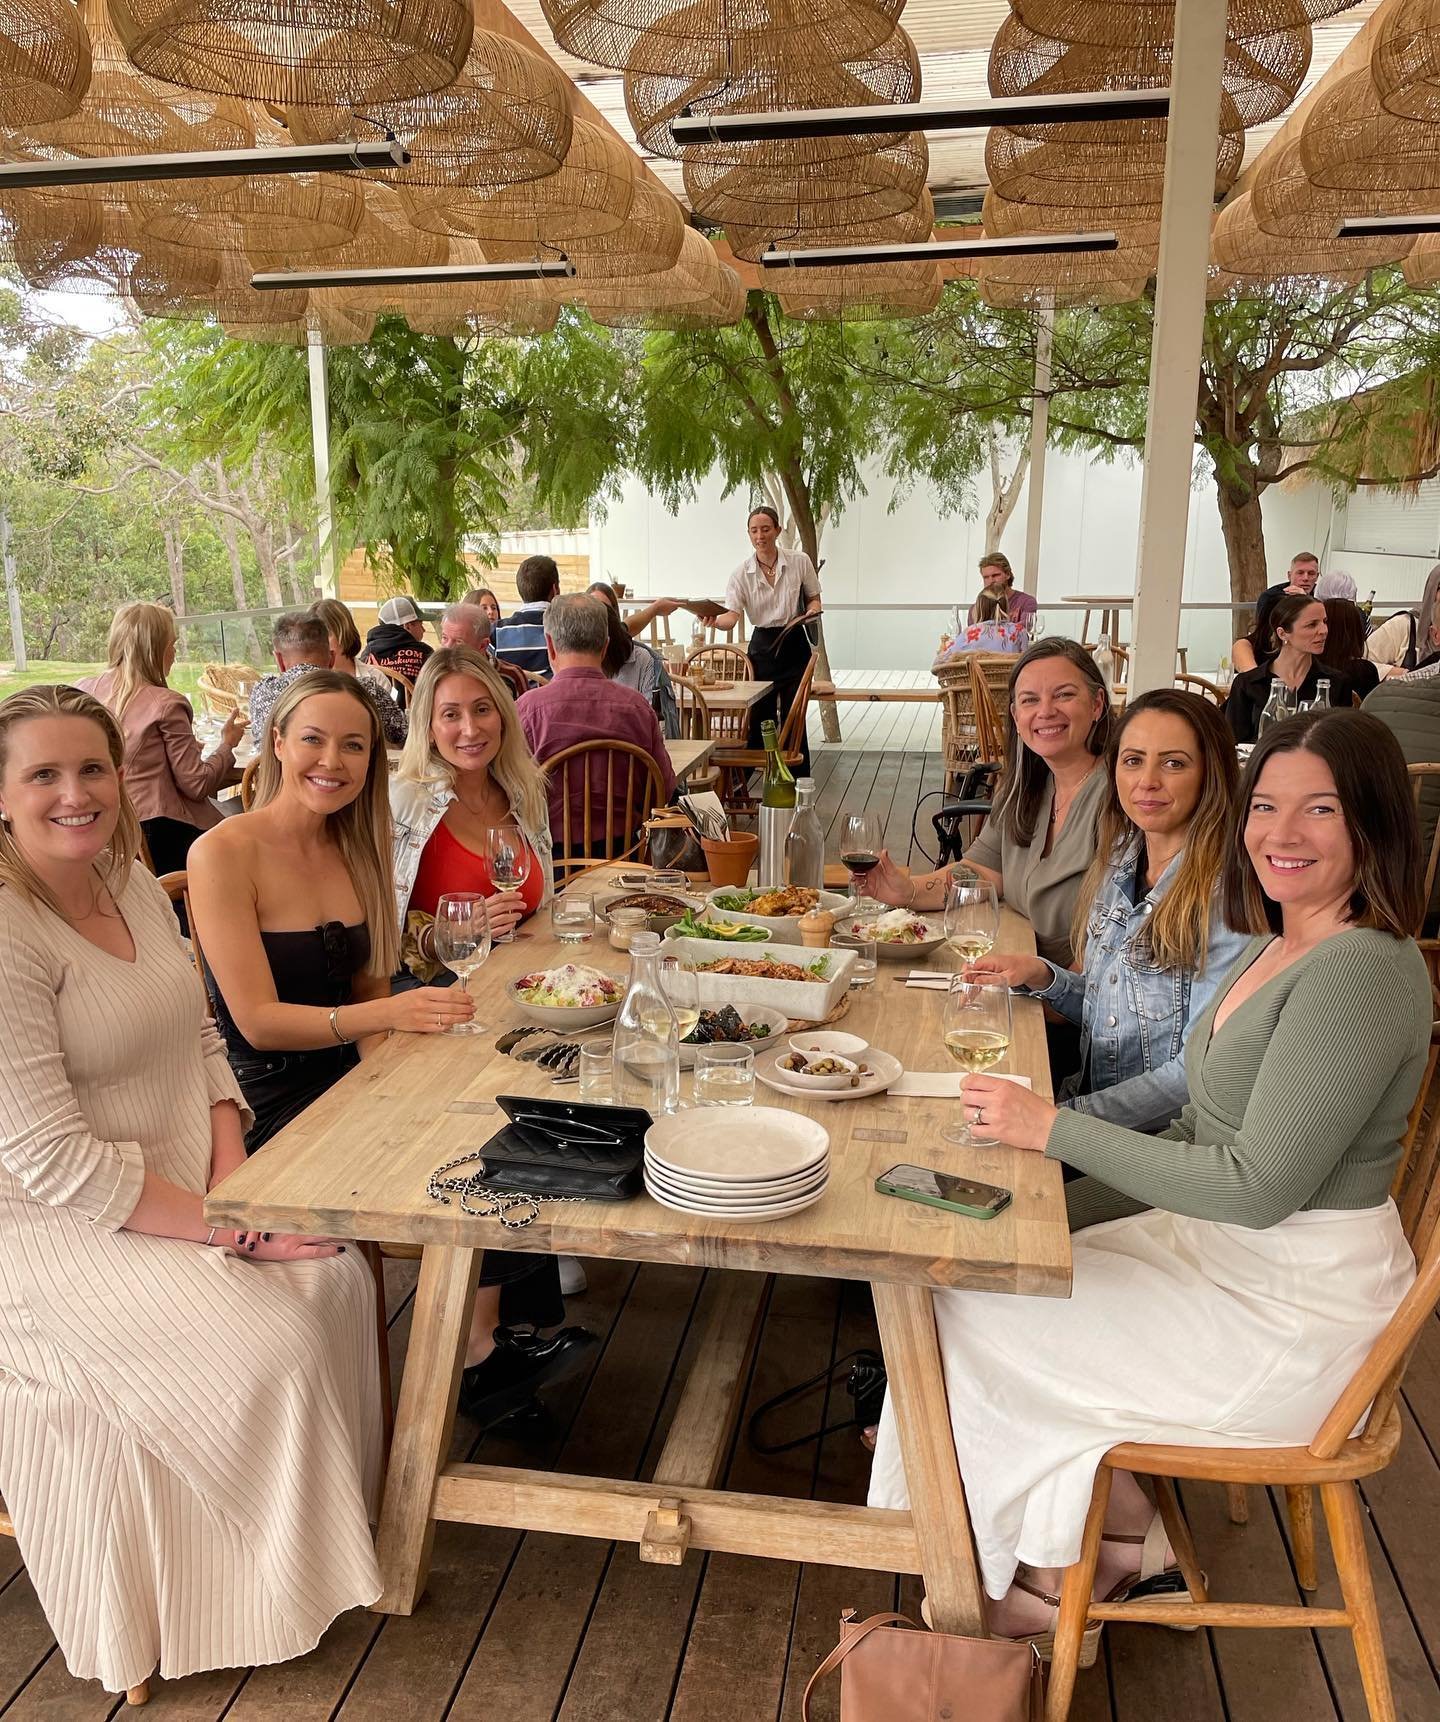 Day 1 of the staff work retreat down south with my customer support and success team (minus a special few ❤️)

The most special time with 2 of the women flying over from Melbourne and the girls all finally meeting everyone face to face instead of our